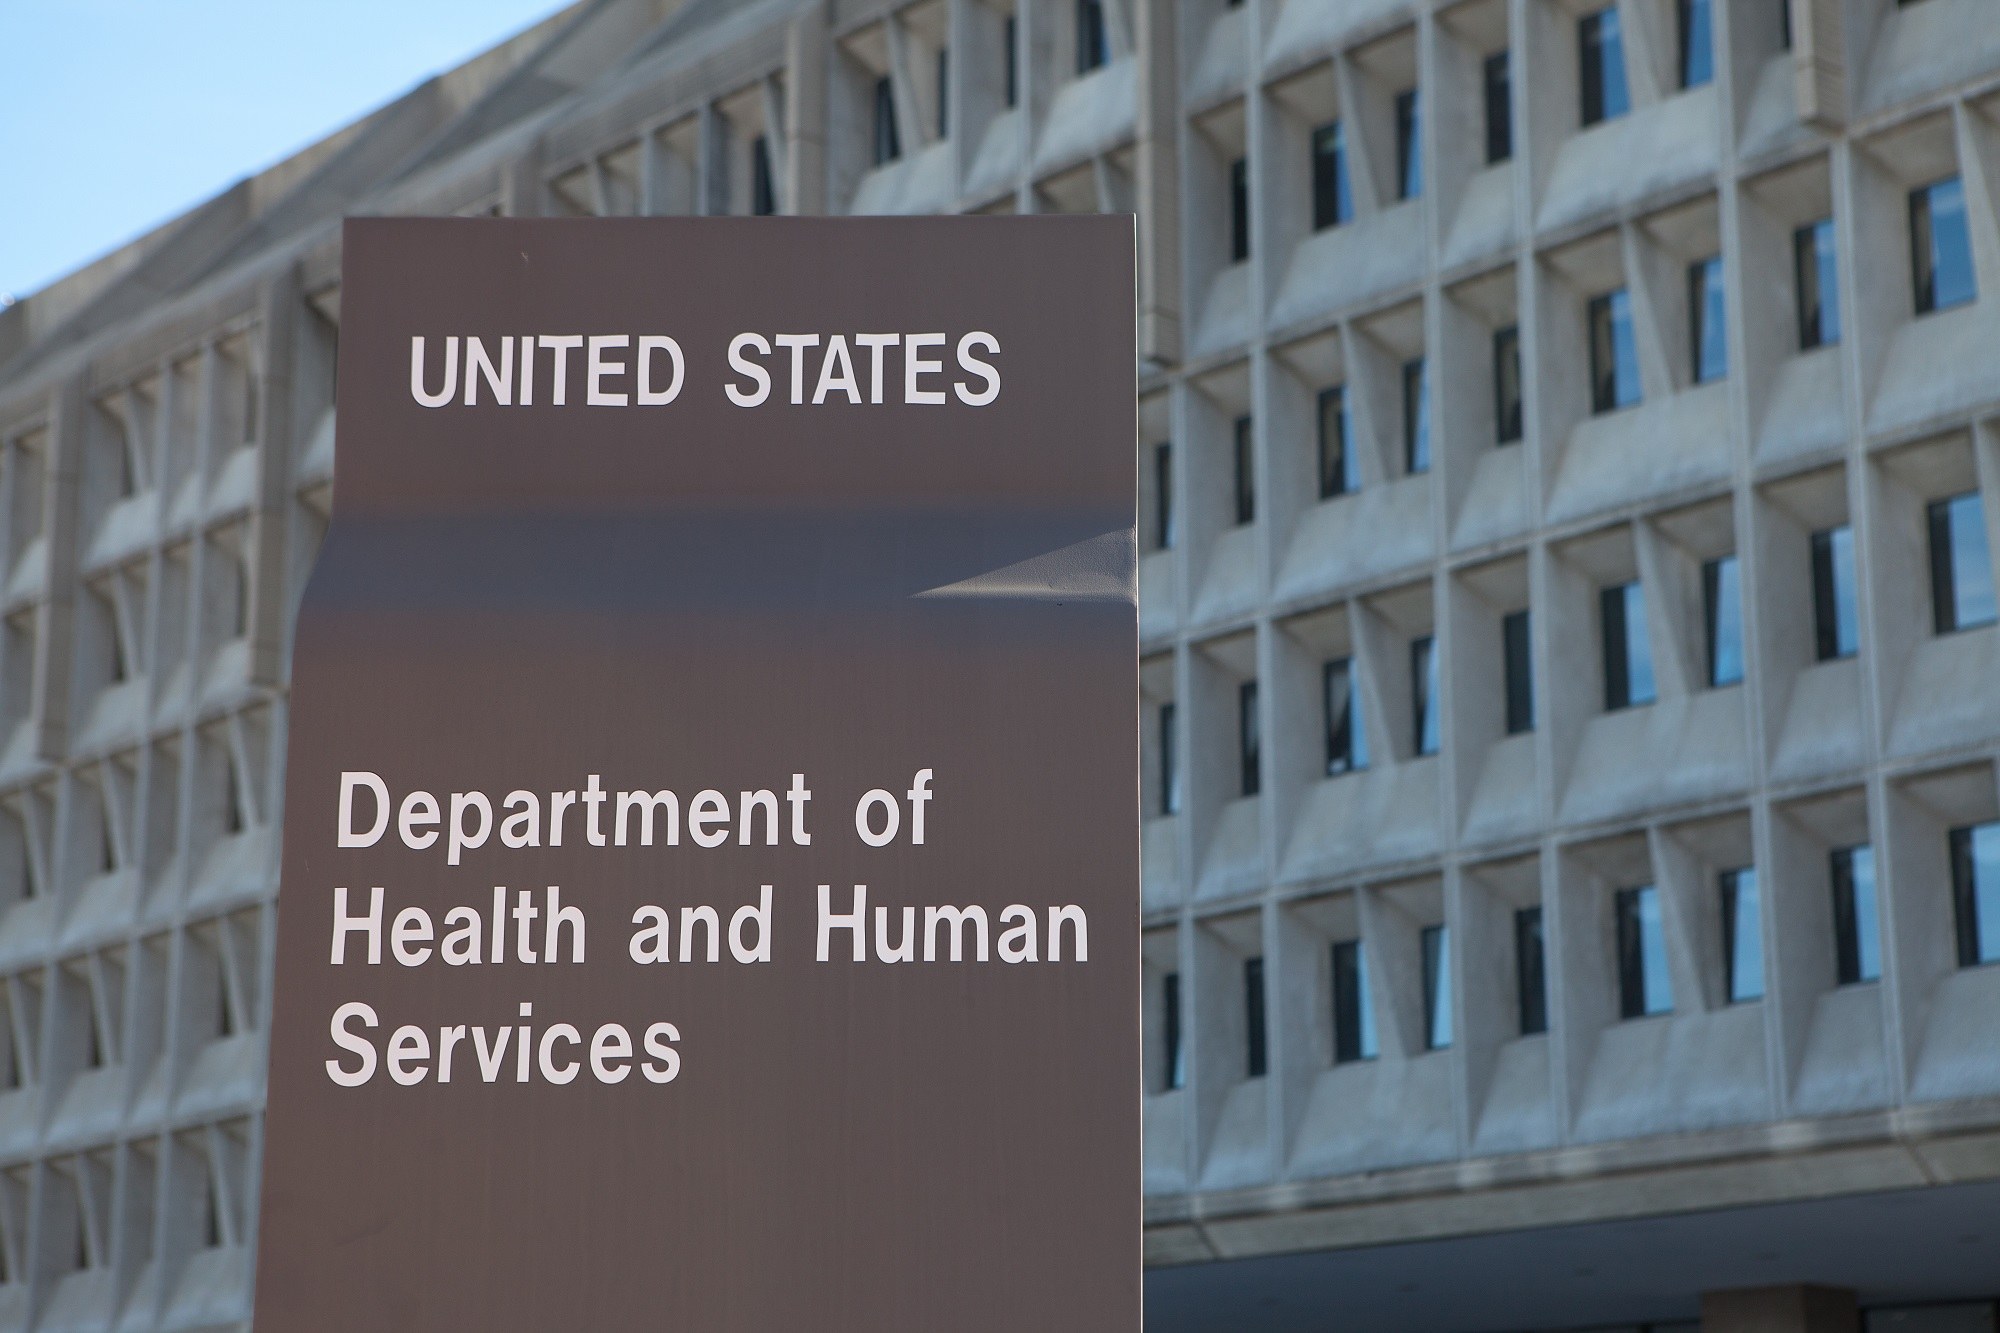 Top US health agency hit with cyberattack as it responds to COVID-19 outbreak